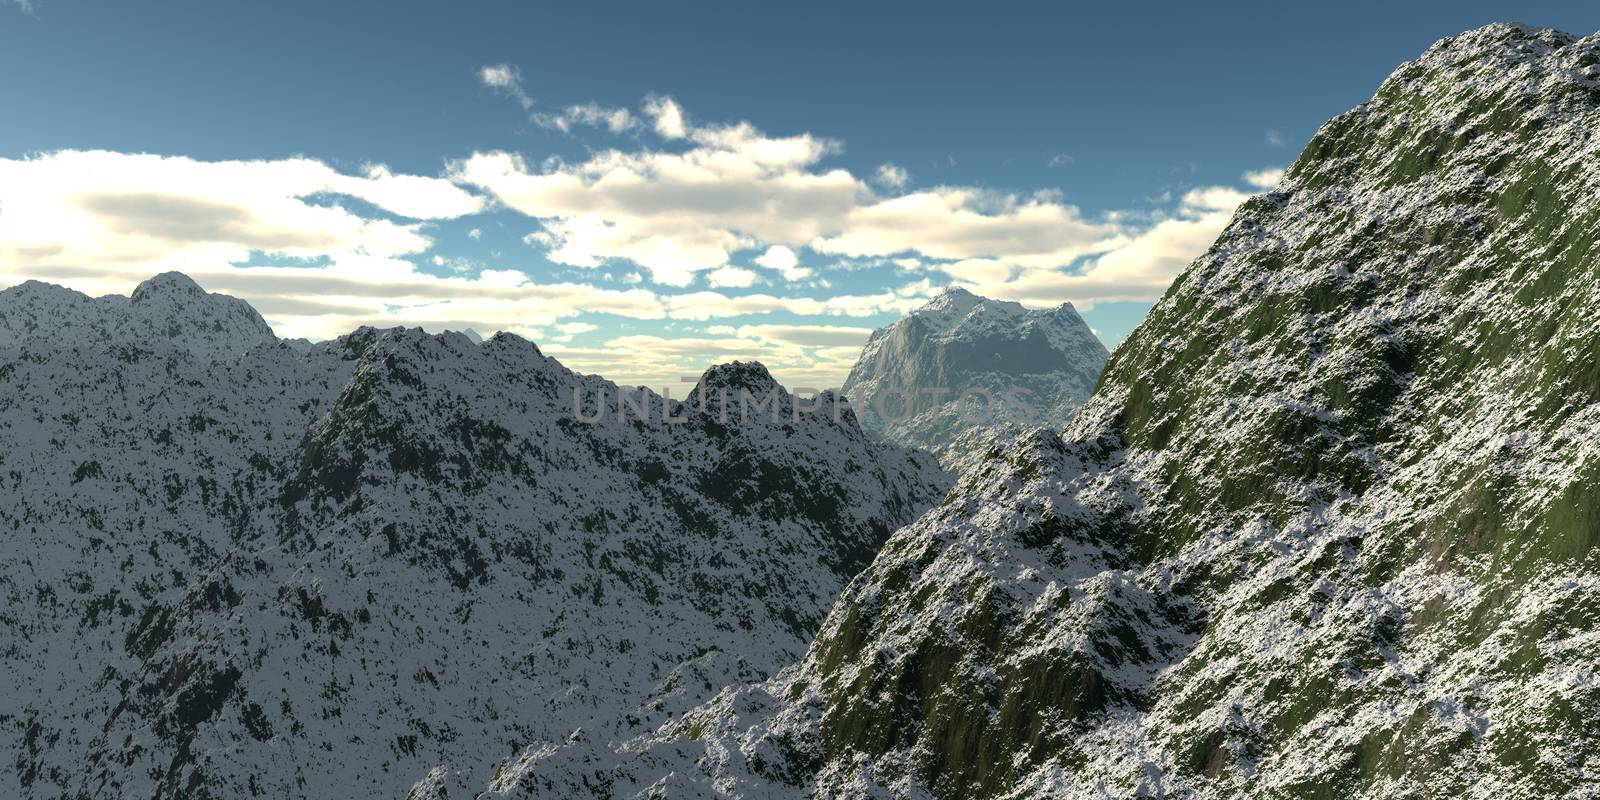 Winter high mountains with snow. 3d illustration